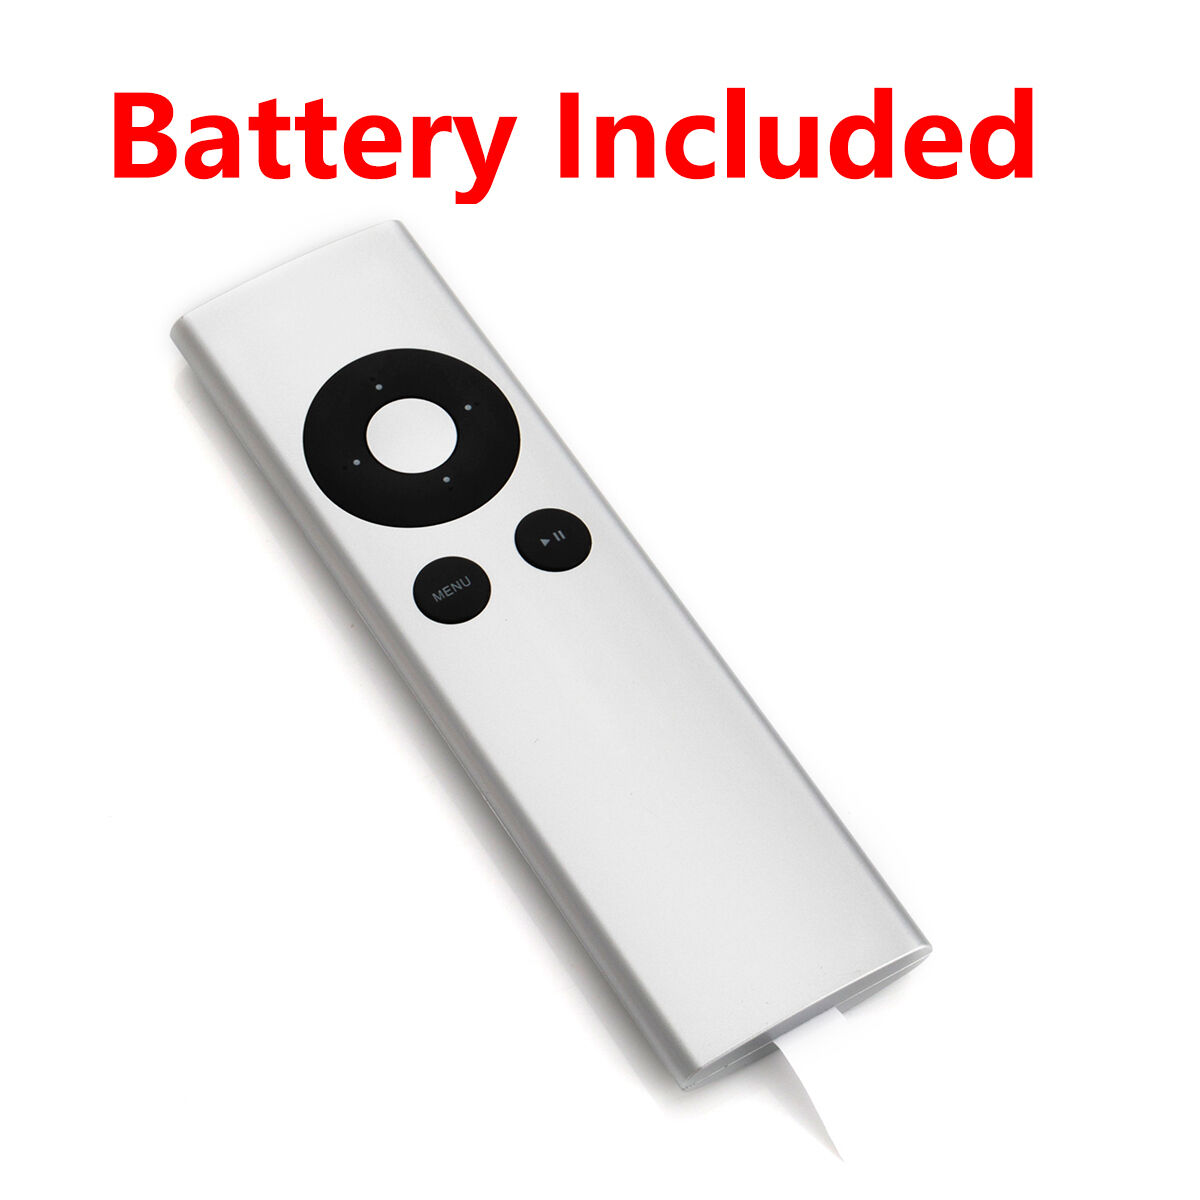 NEW Universal Remote Control MC377LL/A For Apple TV 2 3 Music System Mac mc377ll Unbranded white-apl